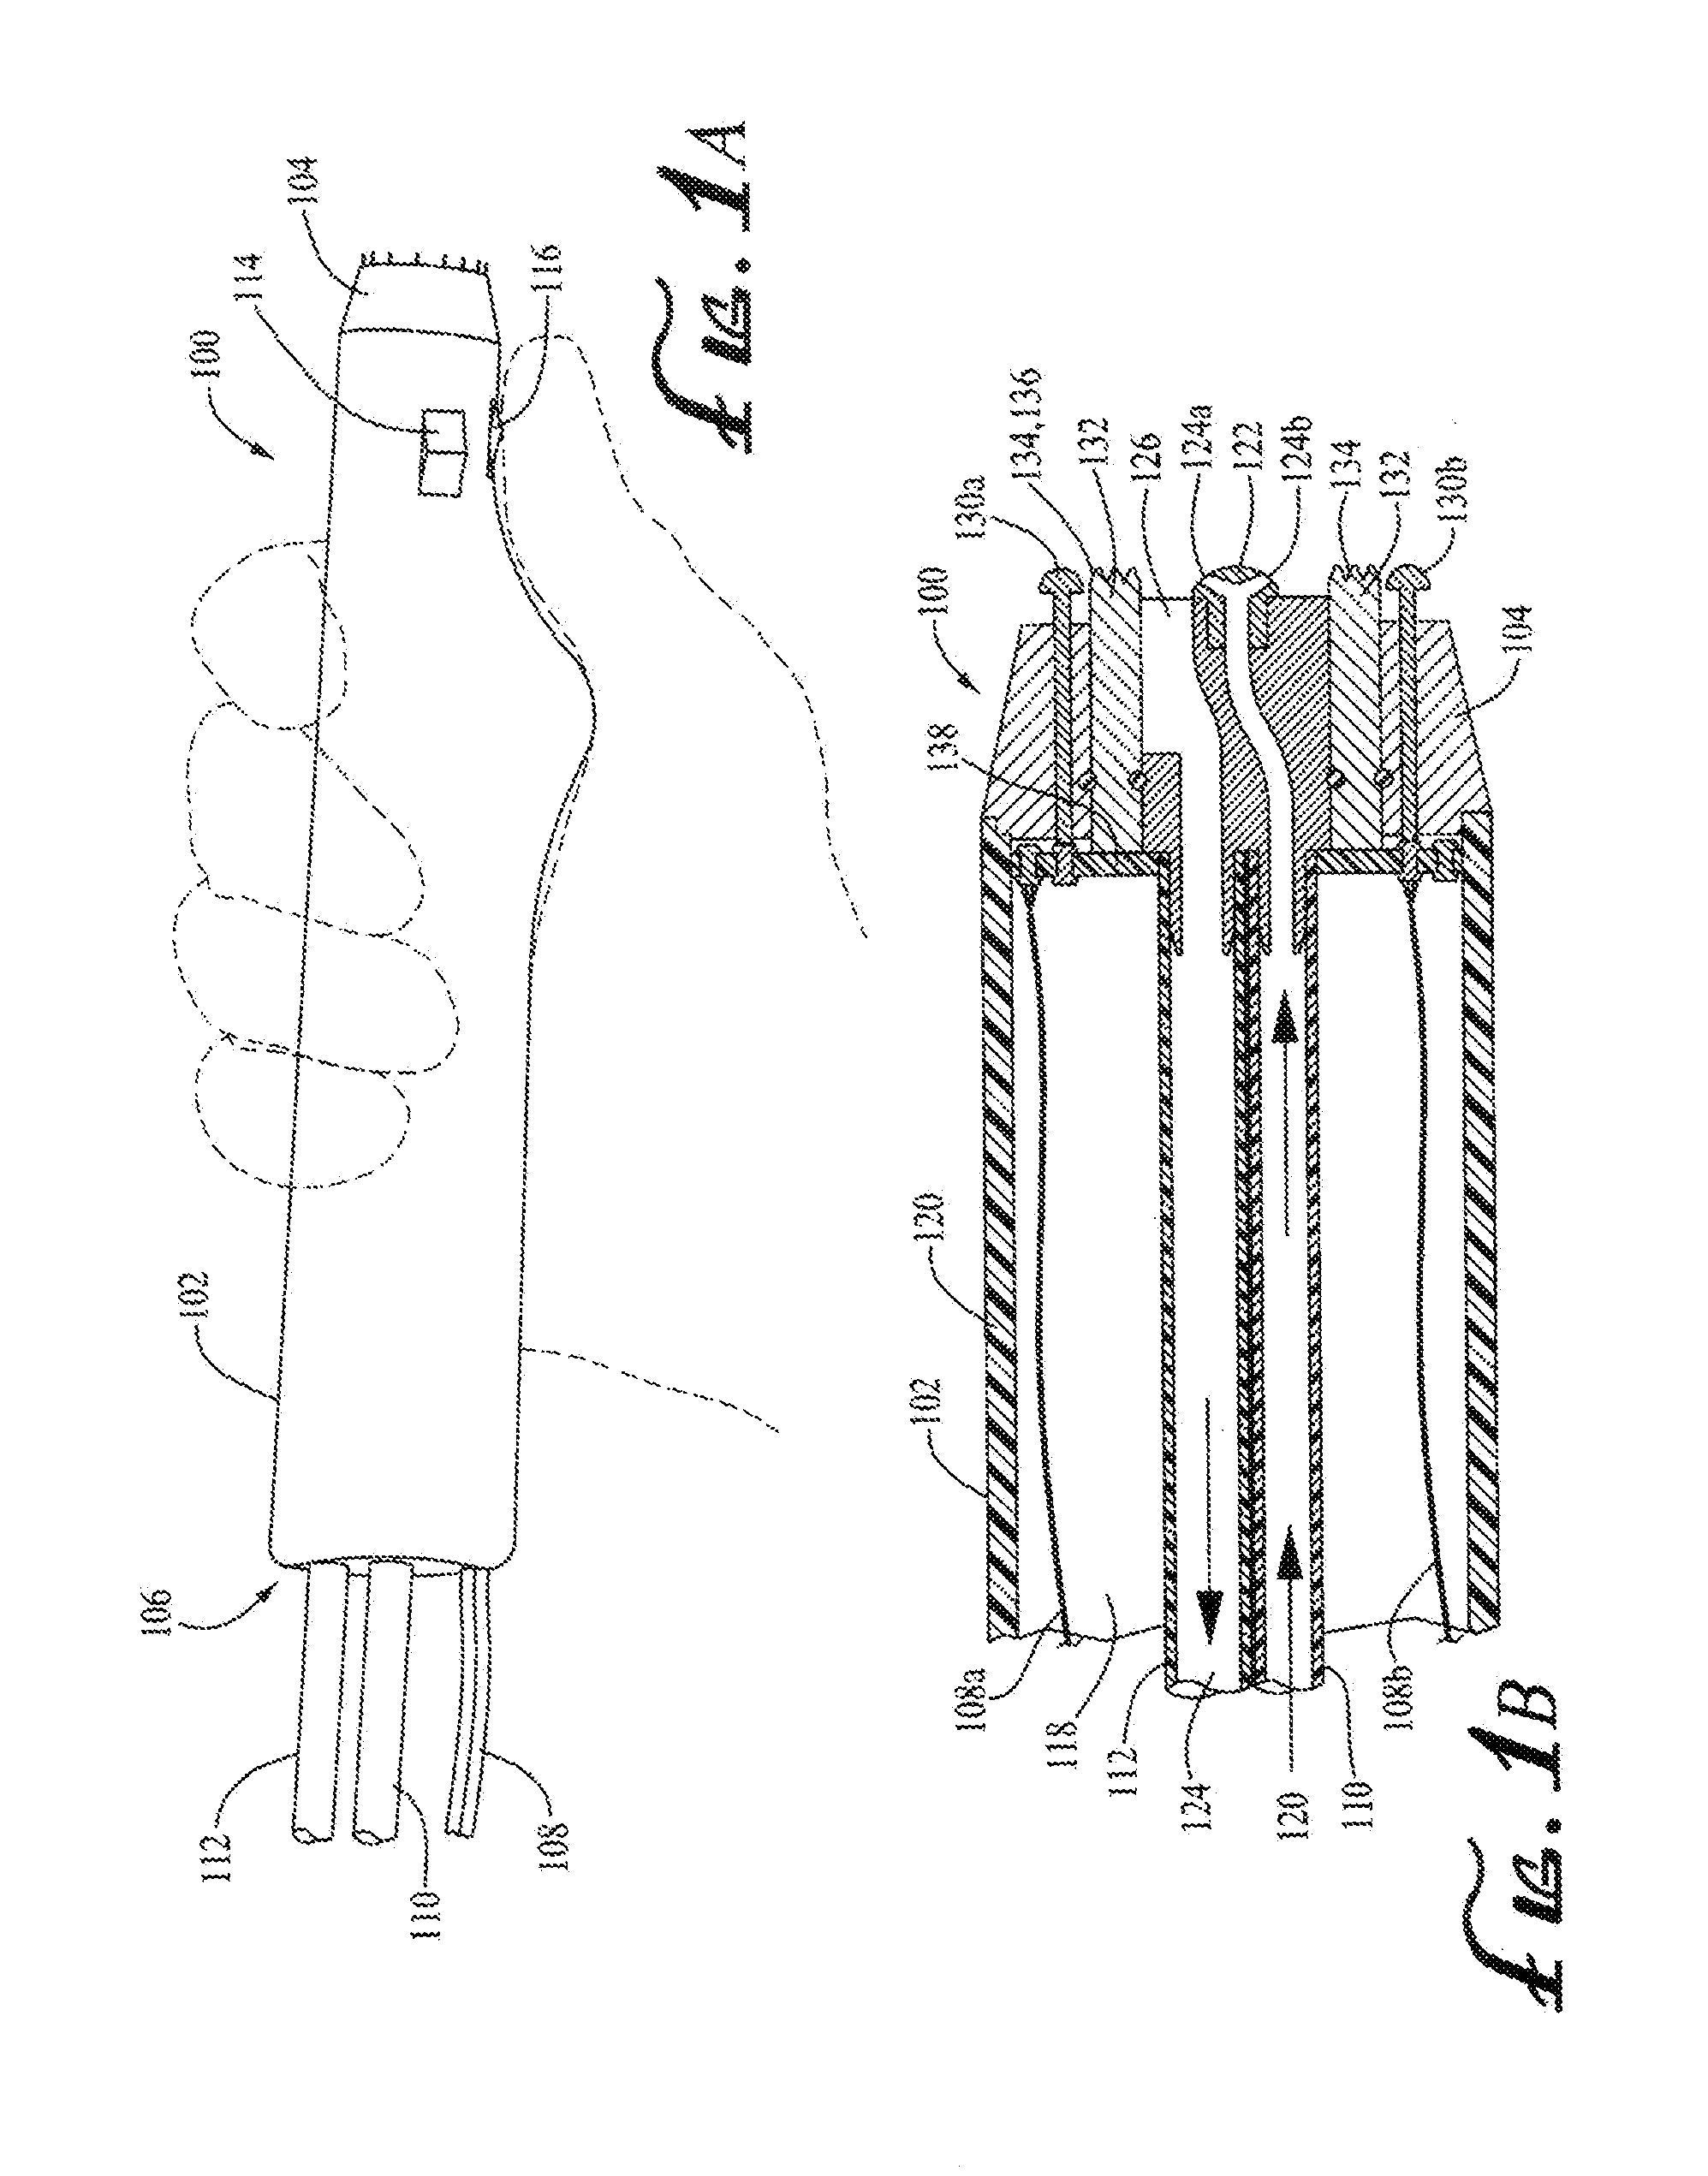 Apparatus and Method for Transdermal Fluid Delivery